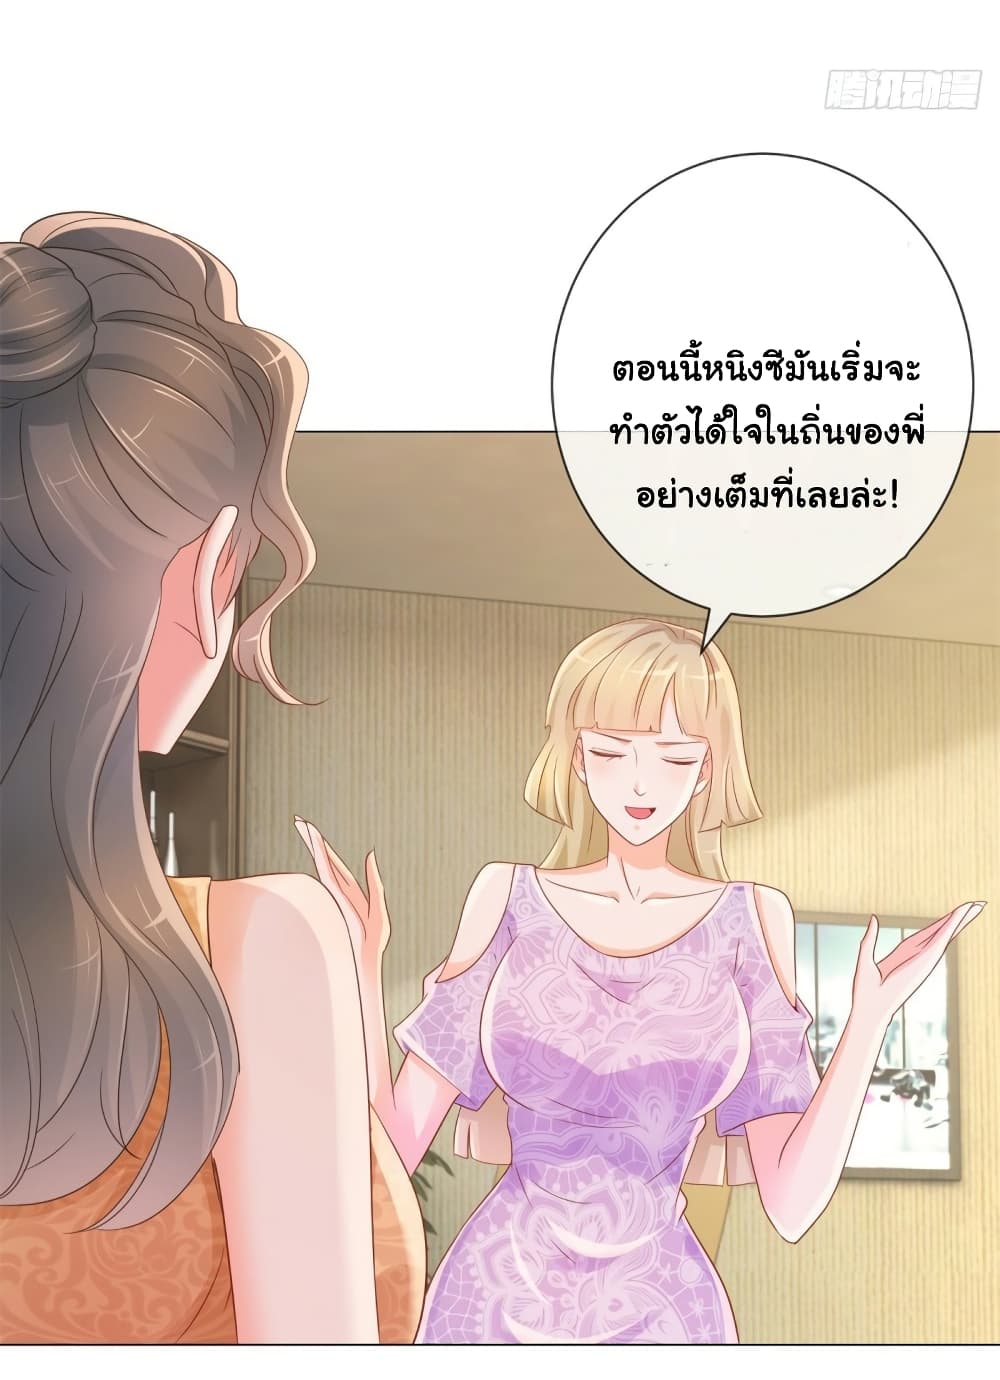 The Lovely Wife And Strange Marriage à¹à¸œà¸™à¸£à¸±à¸à¸¥à¸§à¸‡à¹ƒà¸ˆ 322 (6)